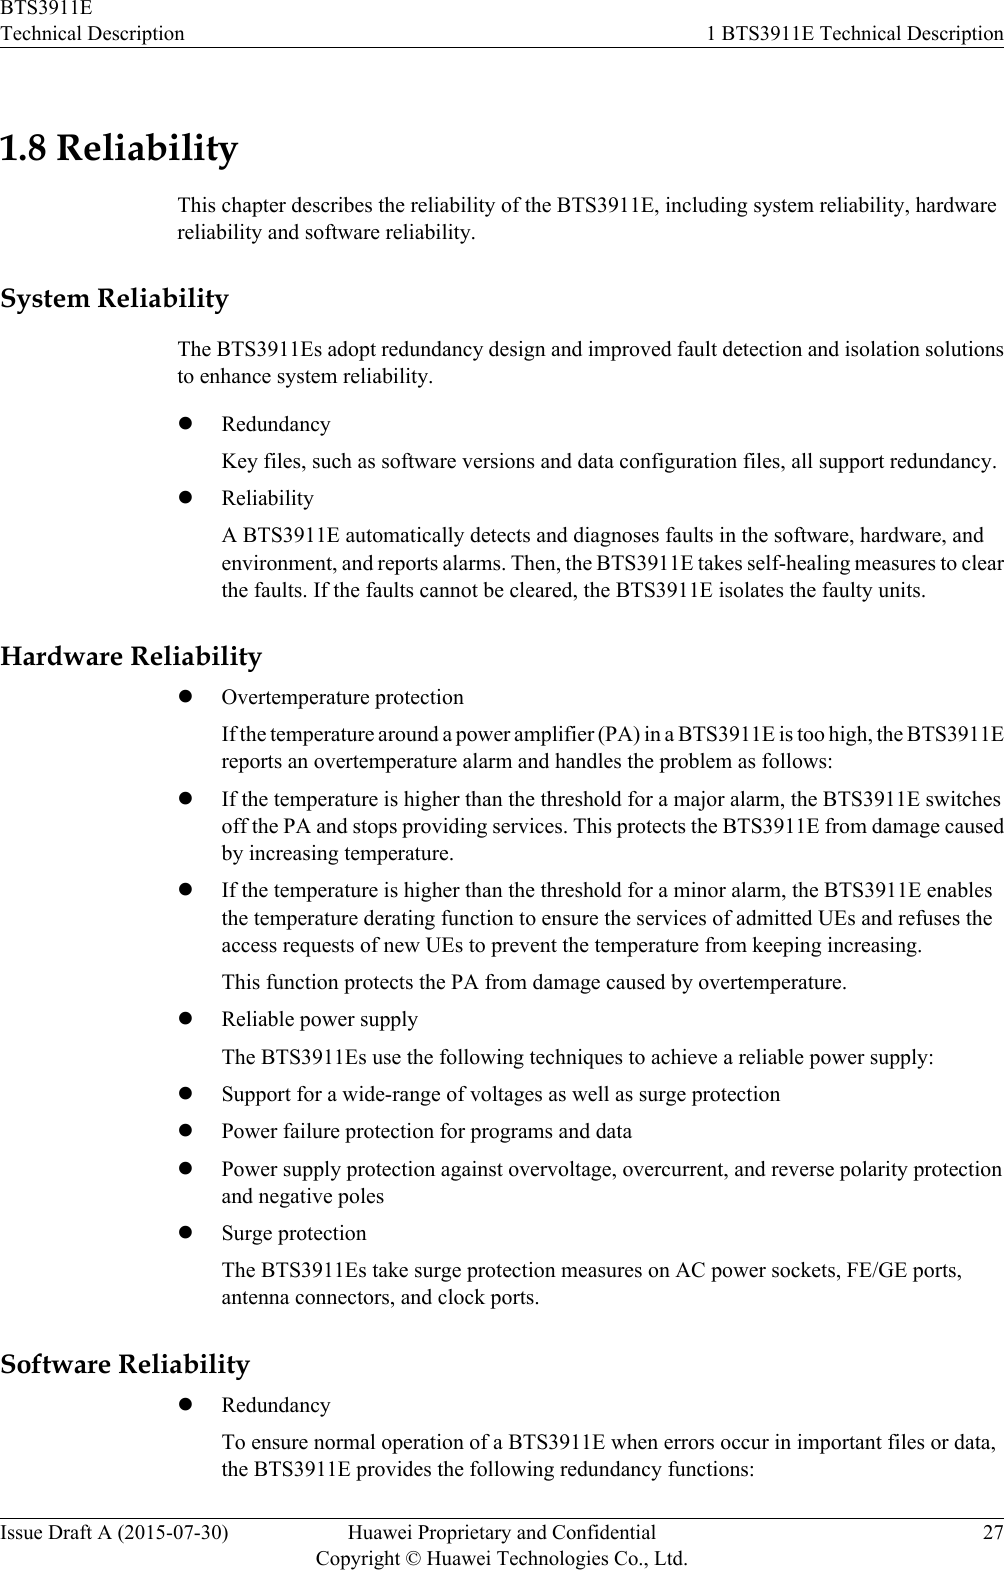 1.8 ReliabilityThis chapter describes the reliability of the BTS3911E, including system reliability, hardwarereliability and software reliability.System ReliabilityThe BTS3911Es adopt redundancy design and improved fault detection and isolation solutionsto enhance system reliability.lRedundancyKey files, such as software versions and data configuration files, all support redundancy.lReliabilityA BTS3911E automatically detects and diagnoses faults in the software, hardware, andenvironment, and reports alarms. Then, the BTS3911E takes self-healing measures to clearthe faults. If the faults cannot be cleared, the BTS3911E isolates the faulty units.Hardware ReliabilitylOvertemperature protectionIf the temperature around a power amplifier (PA) in a BTS3911E is too high, the BTS3911Ereports an overtemperature alarm and handles the problem as follows:lIf the temperature is higher than the threshold for a major alarm, the BTS3911E switchesoff the PA and stops providing services. This protects the BTS3911E from damage causedby increasing temperature.lIf the temperature is higher than the threshold for a minor alarm, the BTS3911E enablesthe temperature derating function to ensure the services of admitted UEs and refuses theaccess requests of new UEs to prevent the temperature from keeping increasing.This function protects the PA from damage caused by overtemperature.lReliable power supplyThe BTS3911Es use the following techniques to achieve a reliable power supply:lSupport for a wide-range of voltages as well as surge protectionlPower failure protection for programs and datalPower supply protection against overvoltage, overcurrent, and reverse polarity protectionand negative poleslSurge protectionThe BTS3911Es take surge protection measures on AC power sockets, FE/GE ports,antenna connectors, and clock ports.Software ReliabilitylRedundancyTo ensure normal operation of a BTS3911E when errors occur in important files or data,the BTS3911E provides the following redundancy functions:BTS3911ETechnical Description 1 BTS3911E Technical DescriptionIssue Draft A (2015-07-30) Huawei Proprietary and ConfidentialCopyright © Huawei Technologies Co., Ltd.27